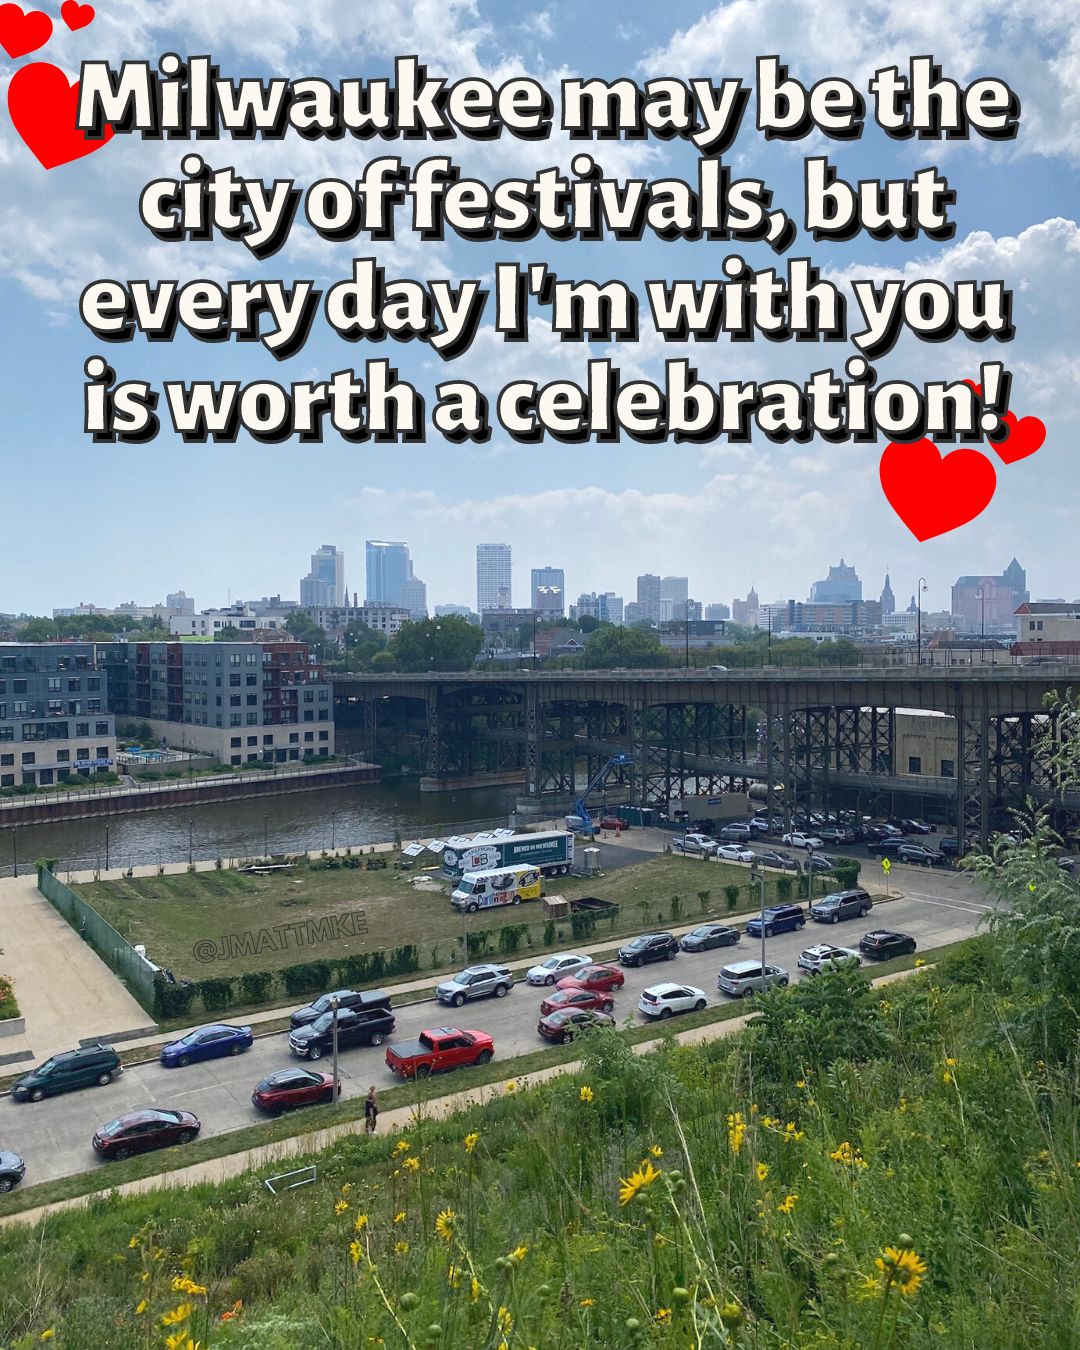 “Milwaukee may be the city of festivals, but every day I’m with you is worth a celebration!”